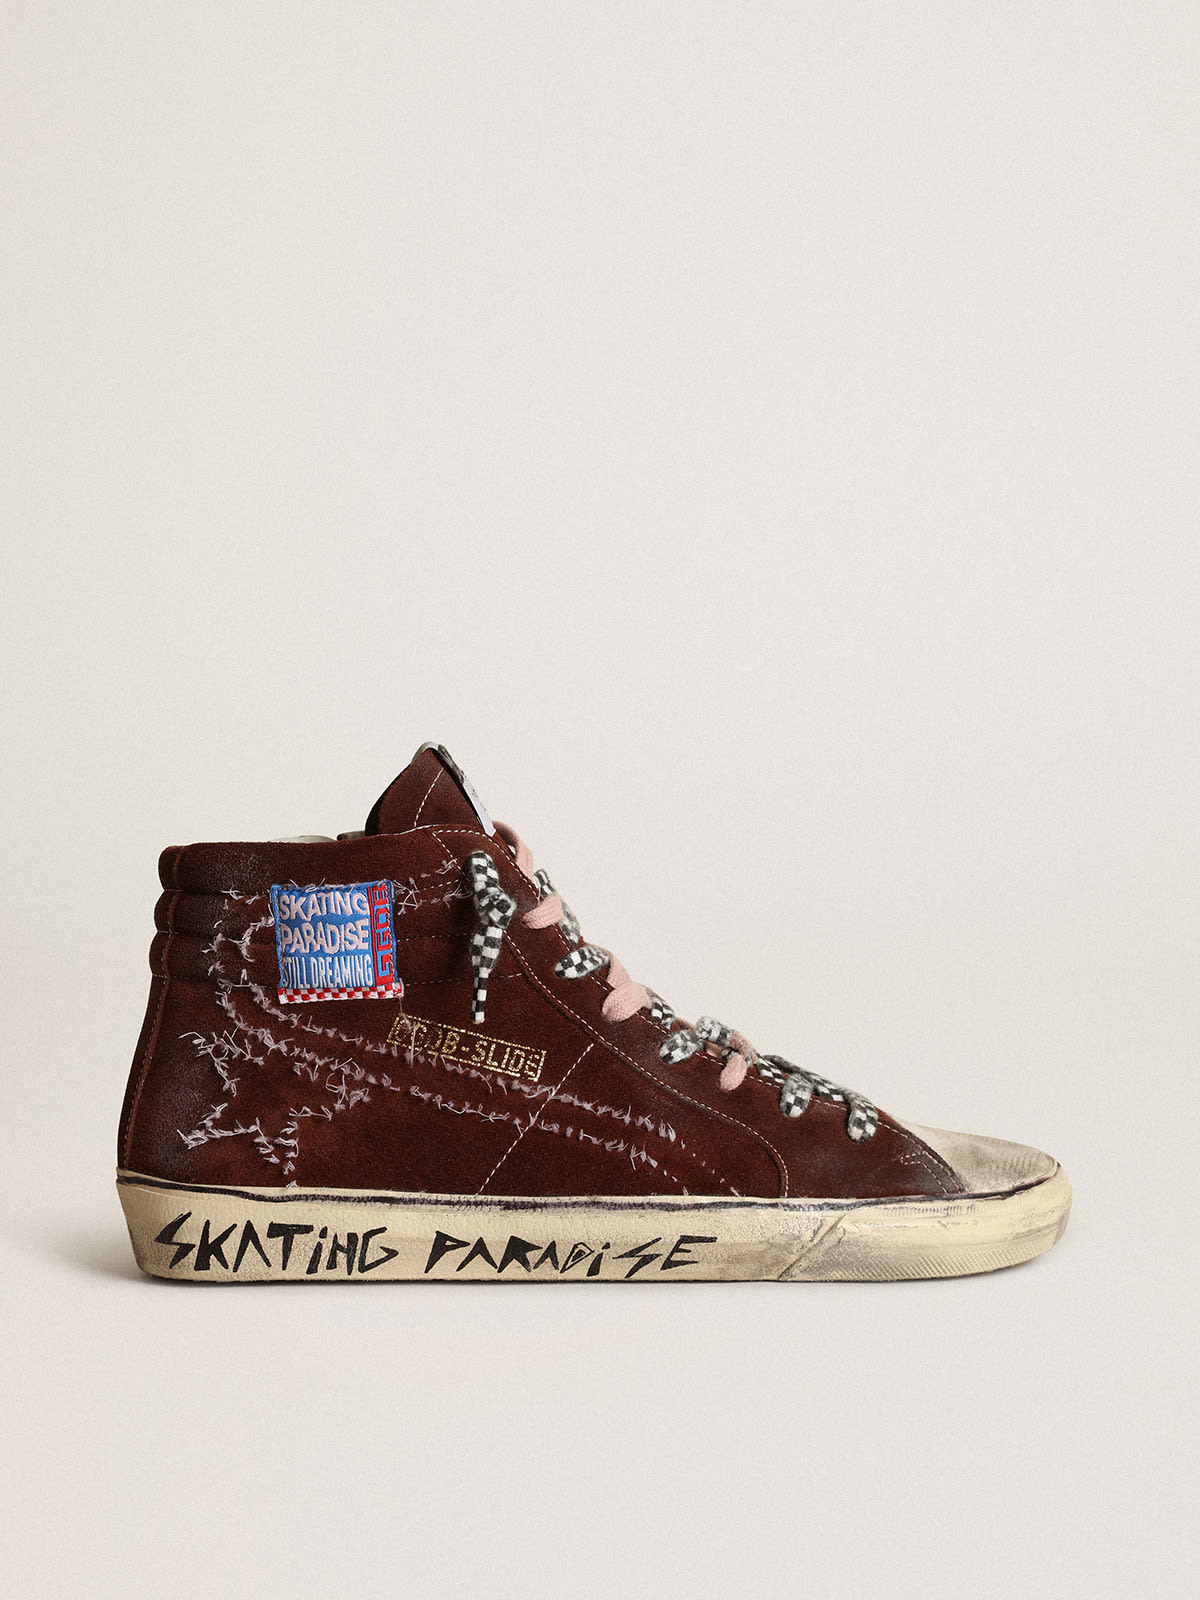 Golden Goose - Men's Slide in chocolate color suede and white stitching in 